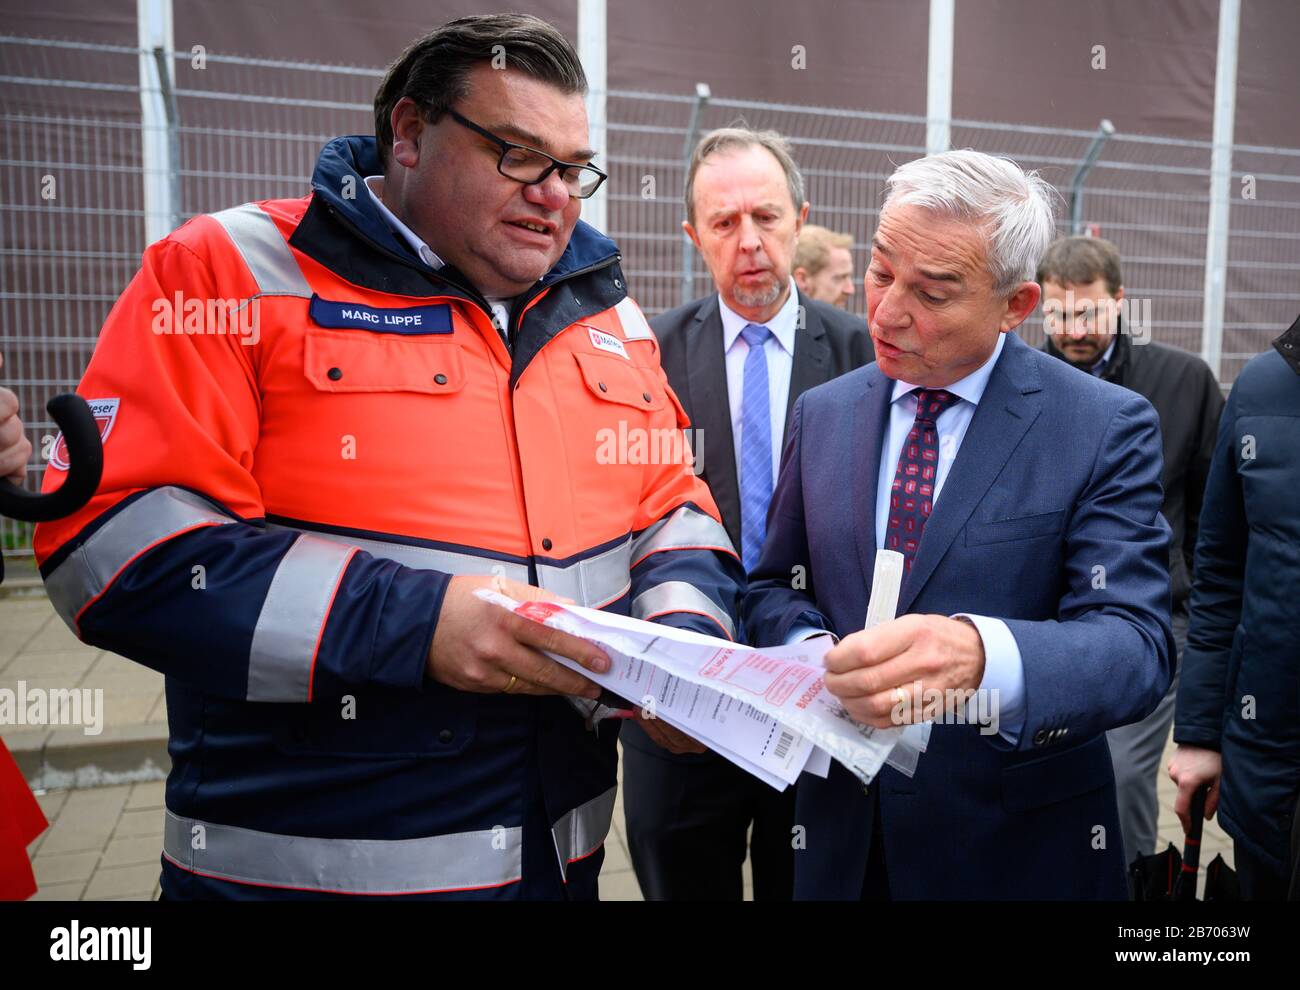 12 March 2020, Baden-Wuerttemberg, Stuttgart: Thomas Strobl (CDU, front, r), Minister of the Interior, Digitisation and Migration of Baden-Württemberg, listens to explanations of the procedure by Marc Lippe, District Managing Director of Malteser in the Neckar-Alb district, during a visit to a corona smear centre at the Stuttgart Trade Fair Centre. Photo: Sebastian Gollnow/dpa Stock Photo